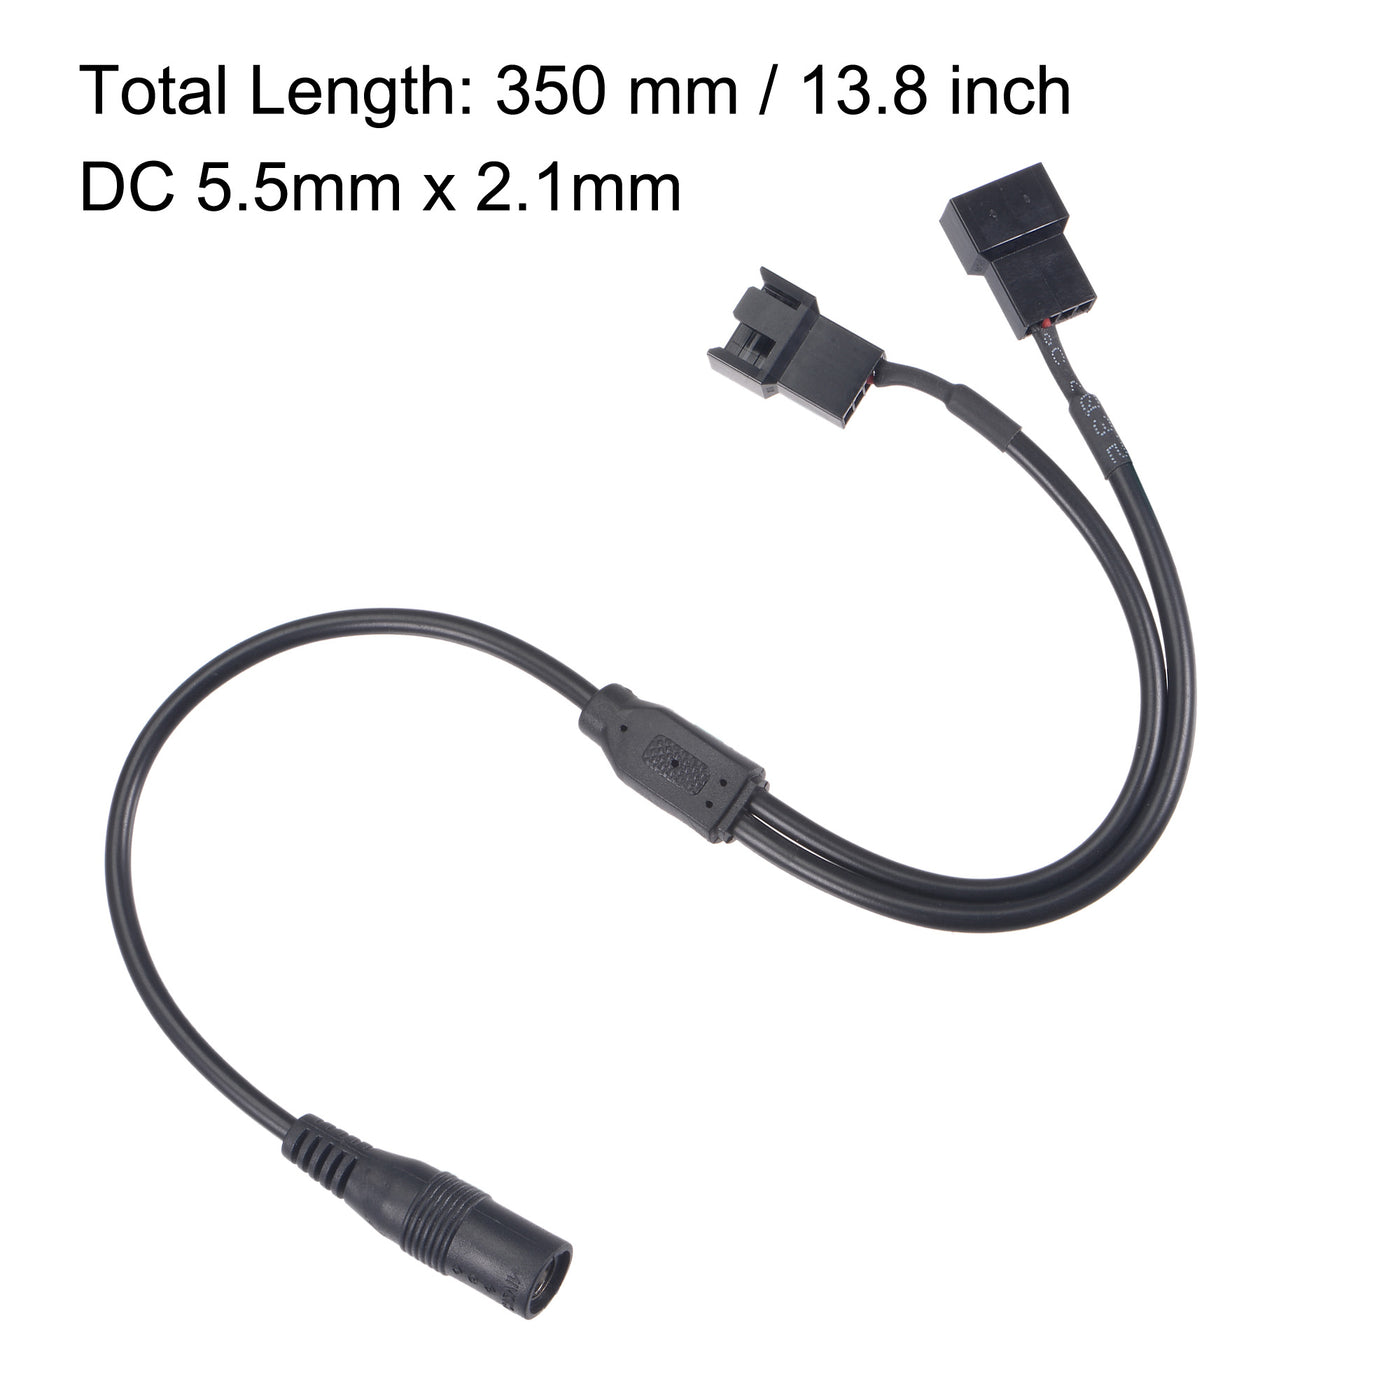 uxcell Uxcell Fan Power Supply Cable DC 5.5mmx2.1mm to 2 Port 3 Pin or 4 Pin Output 13.8 Inch